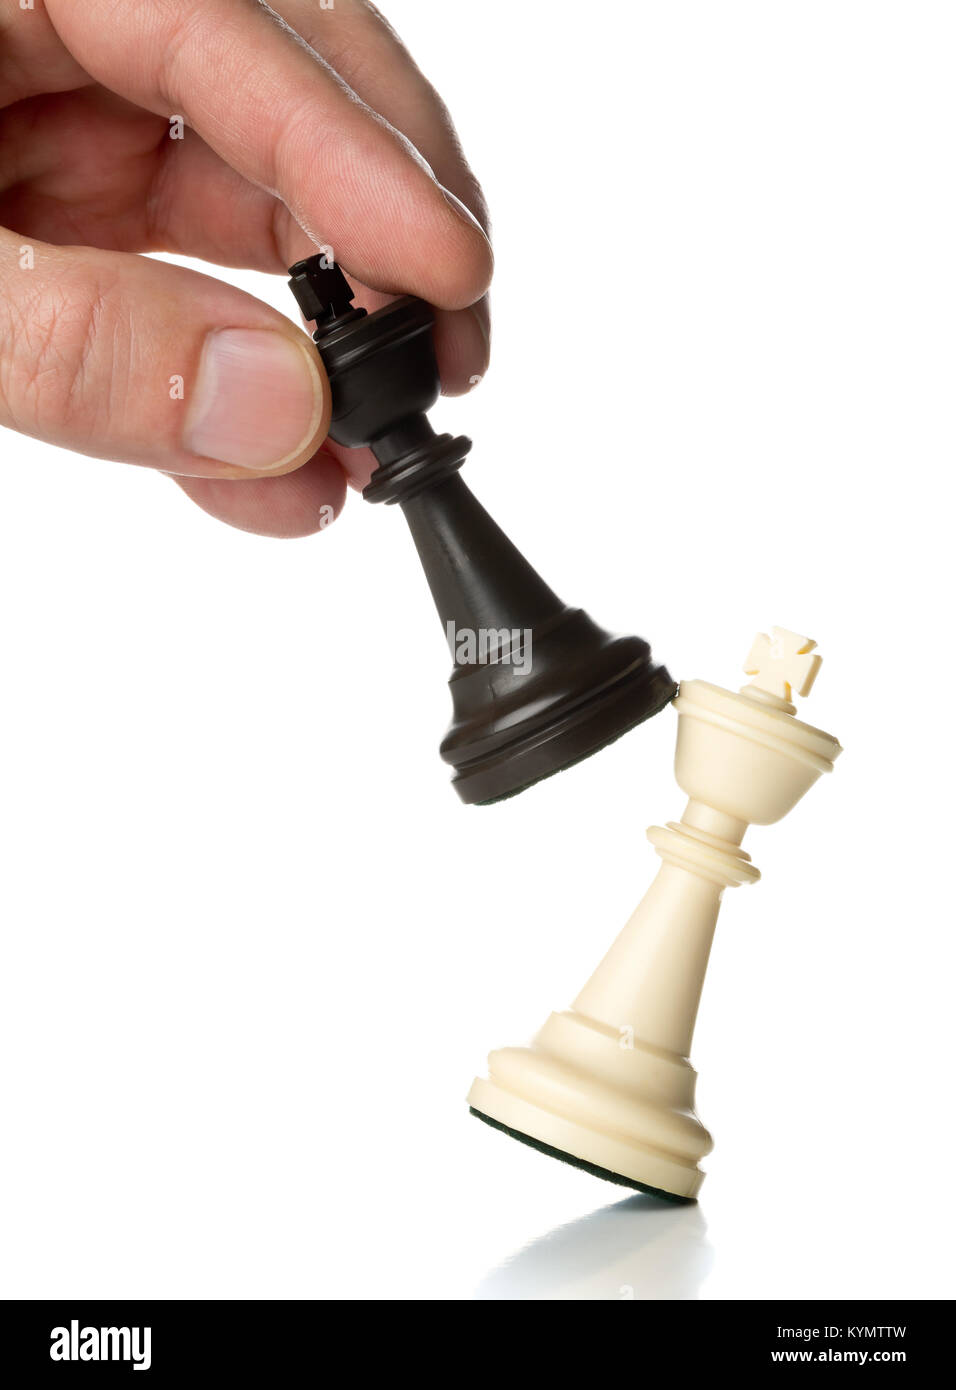 Manager knocking over one chess king figure with another king chess figure - leadership, takeover, promotion or strategy concept over white background Stock Photo